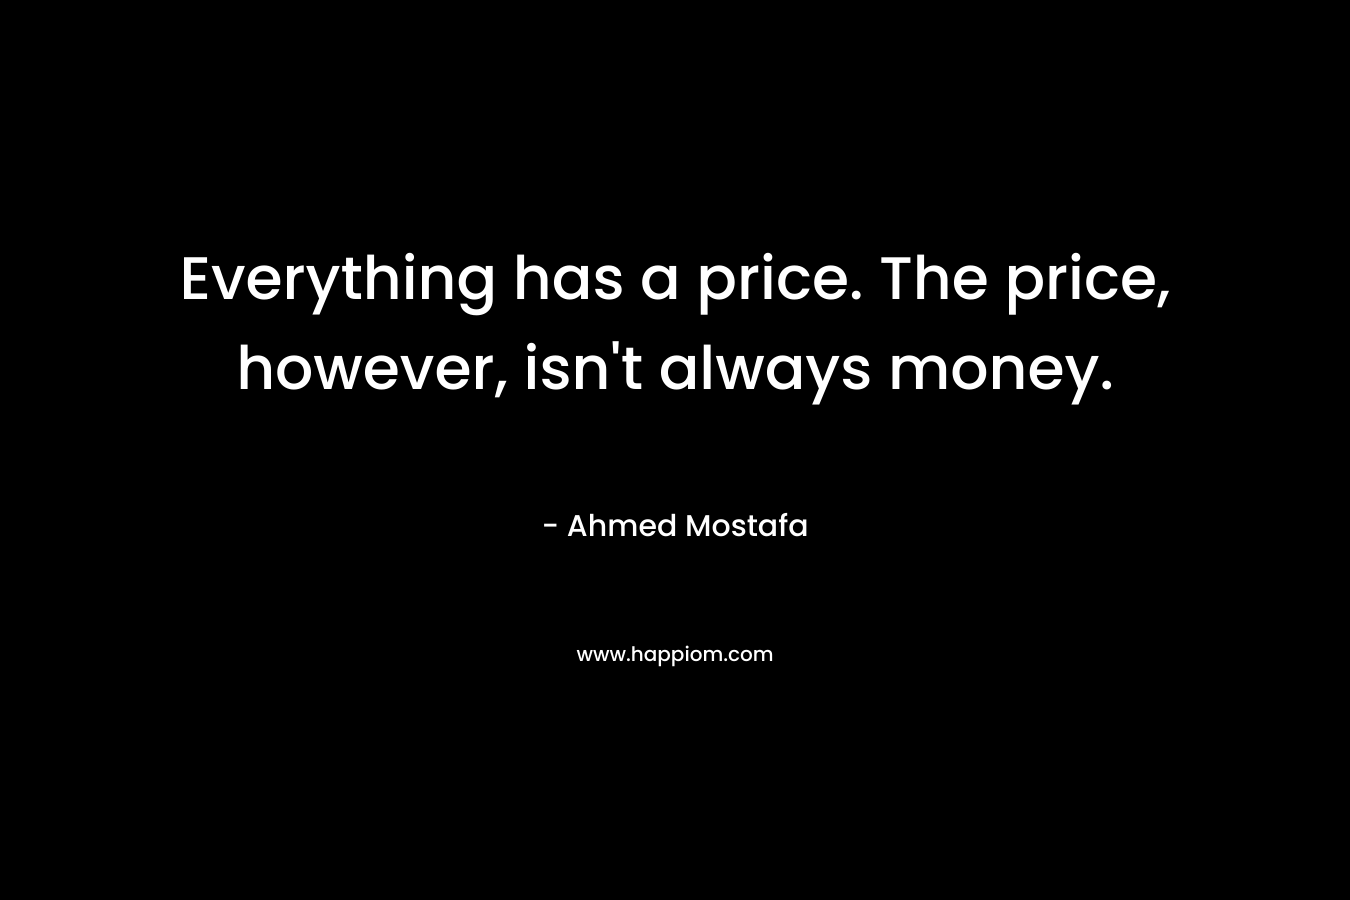 Everything has a price. The price, however, isn't always money.